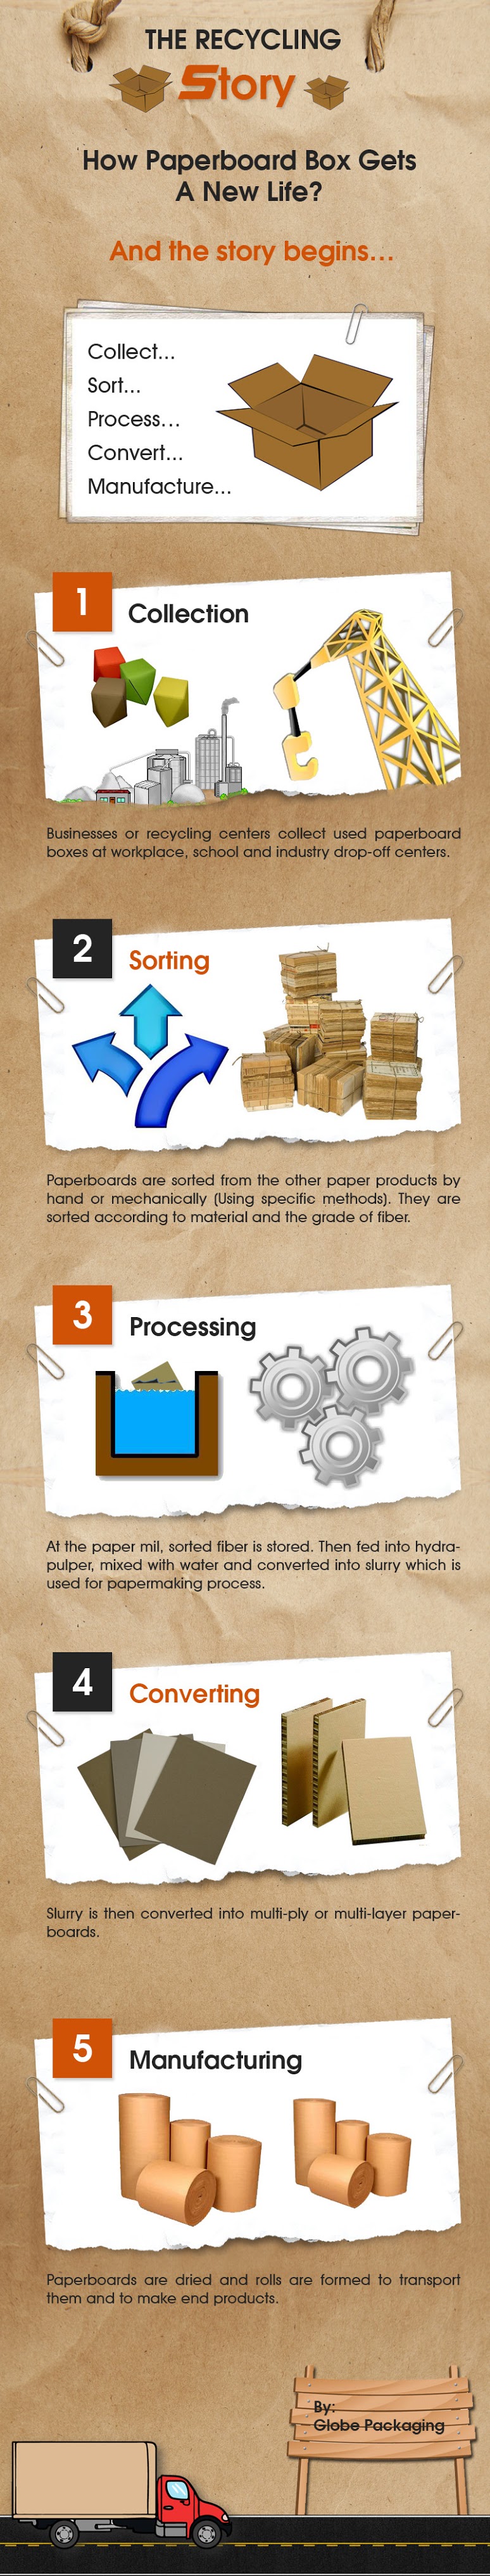 Recycling Story of Paperboard #infographic